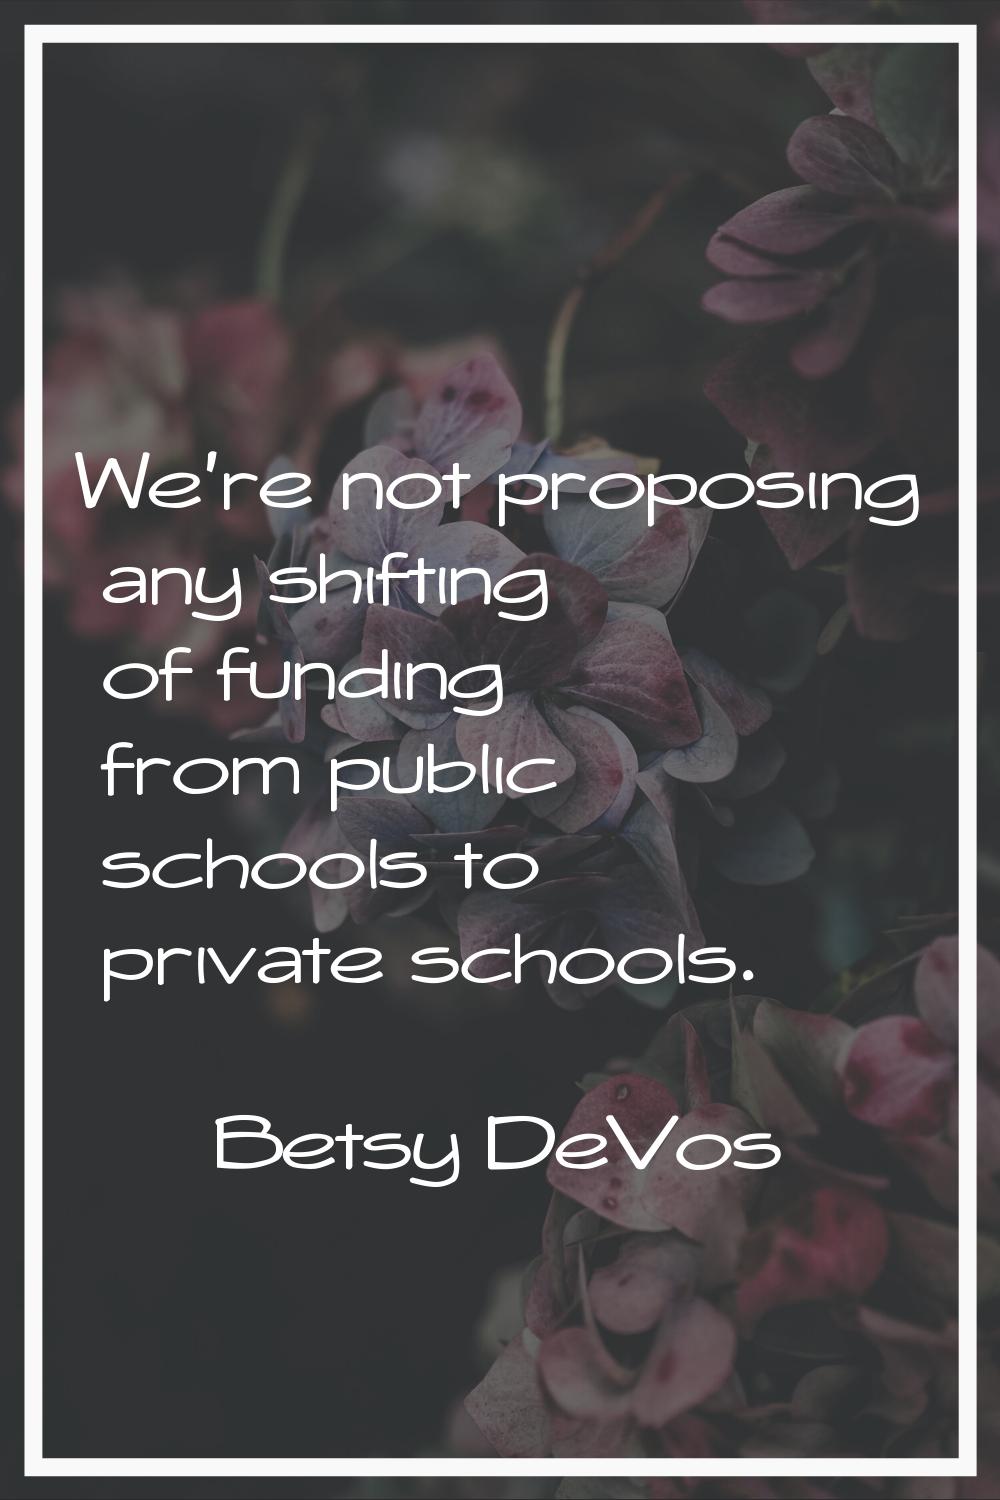 We're not proposing any shifting of funding from public schools to private schools.